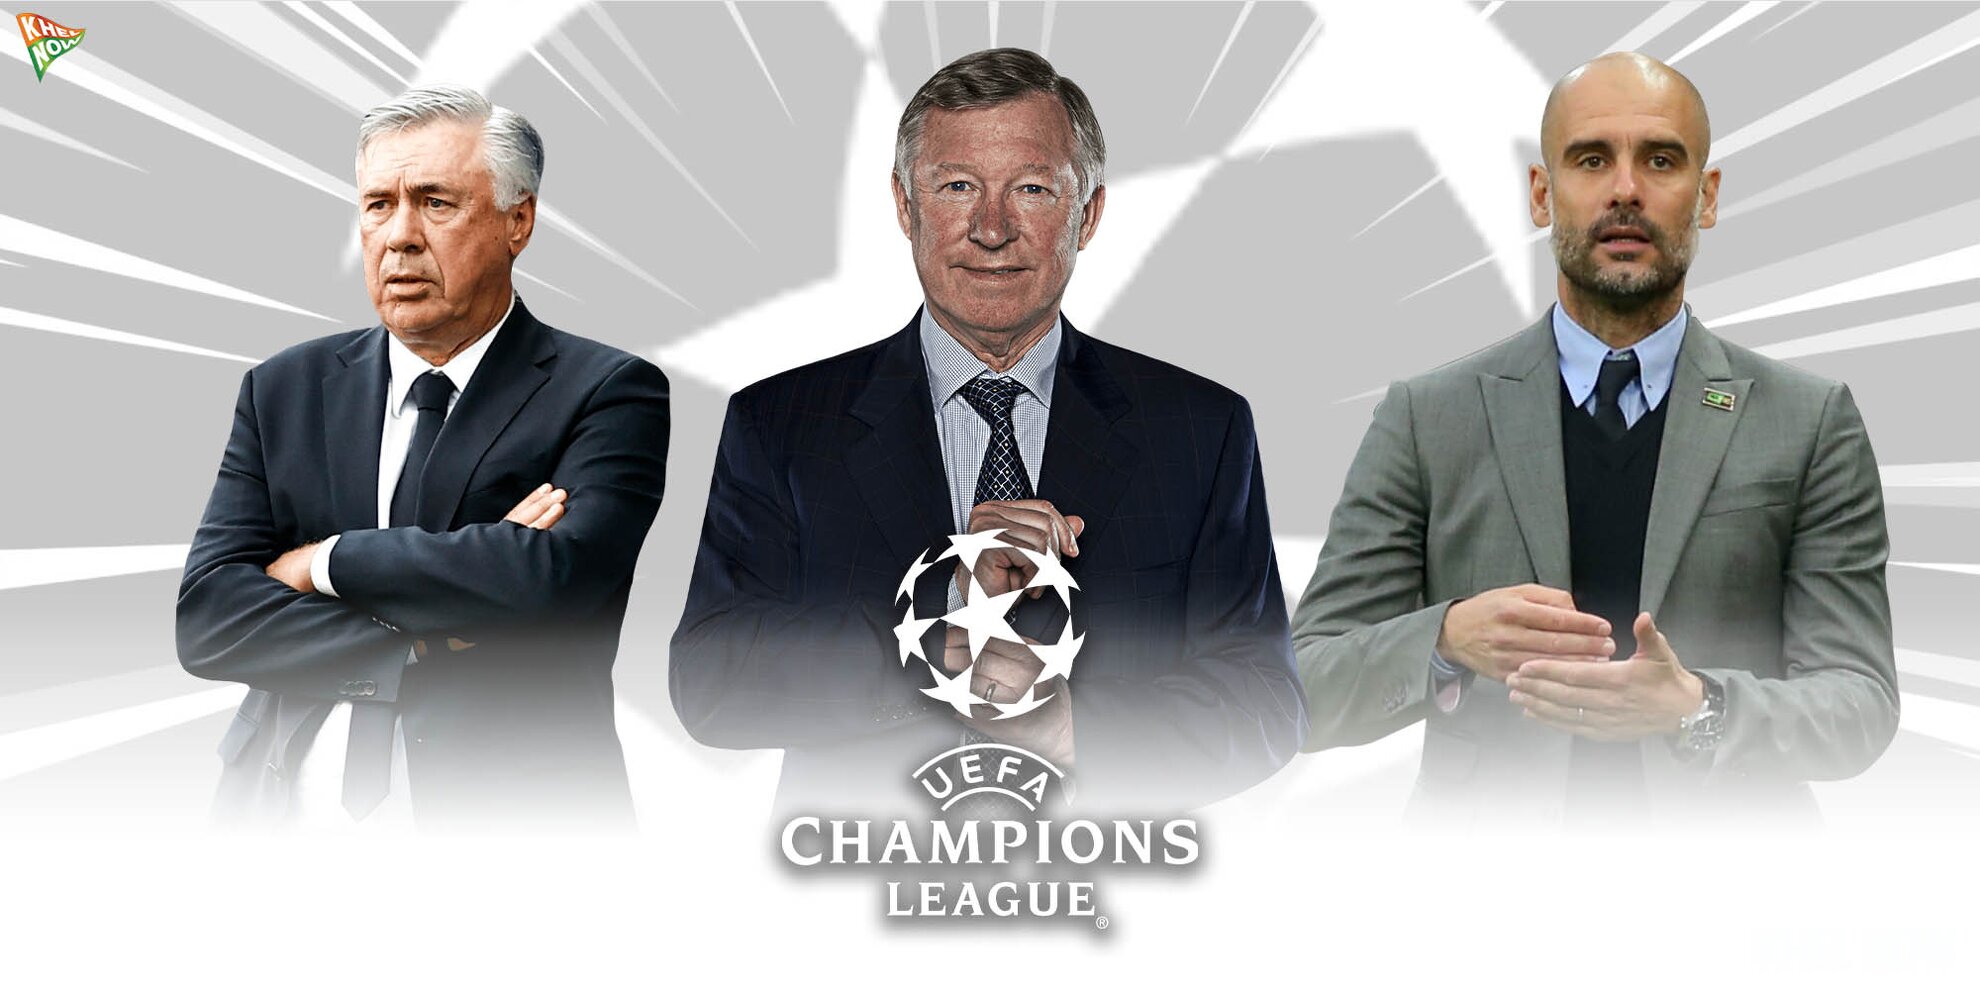 Top 10 managers with most wins in UEFA Champions League history